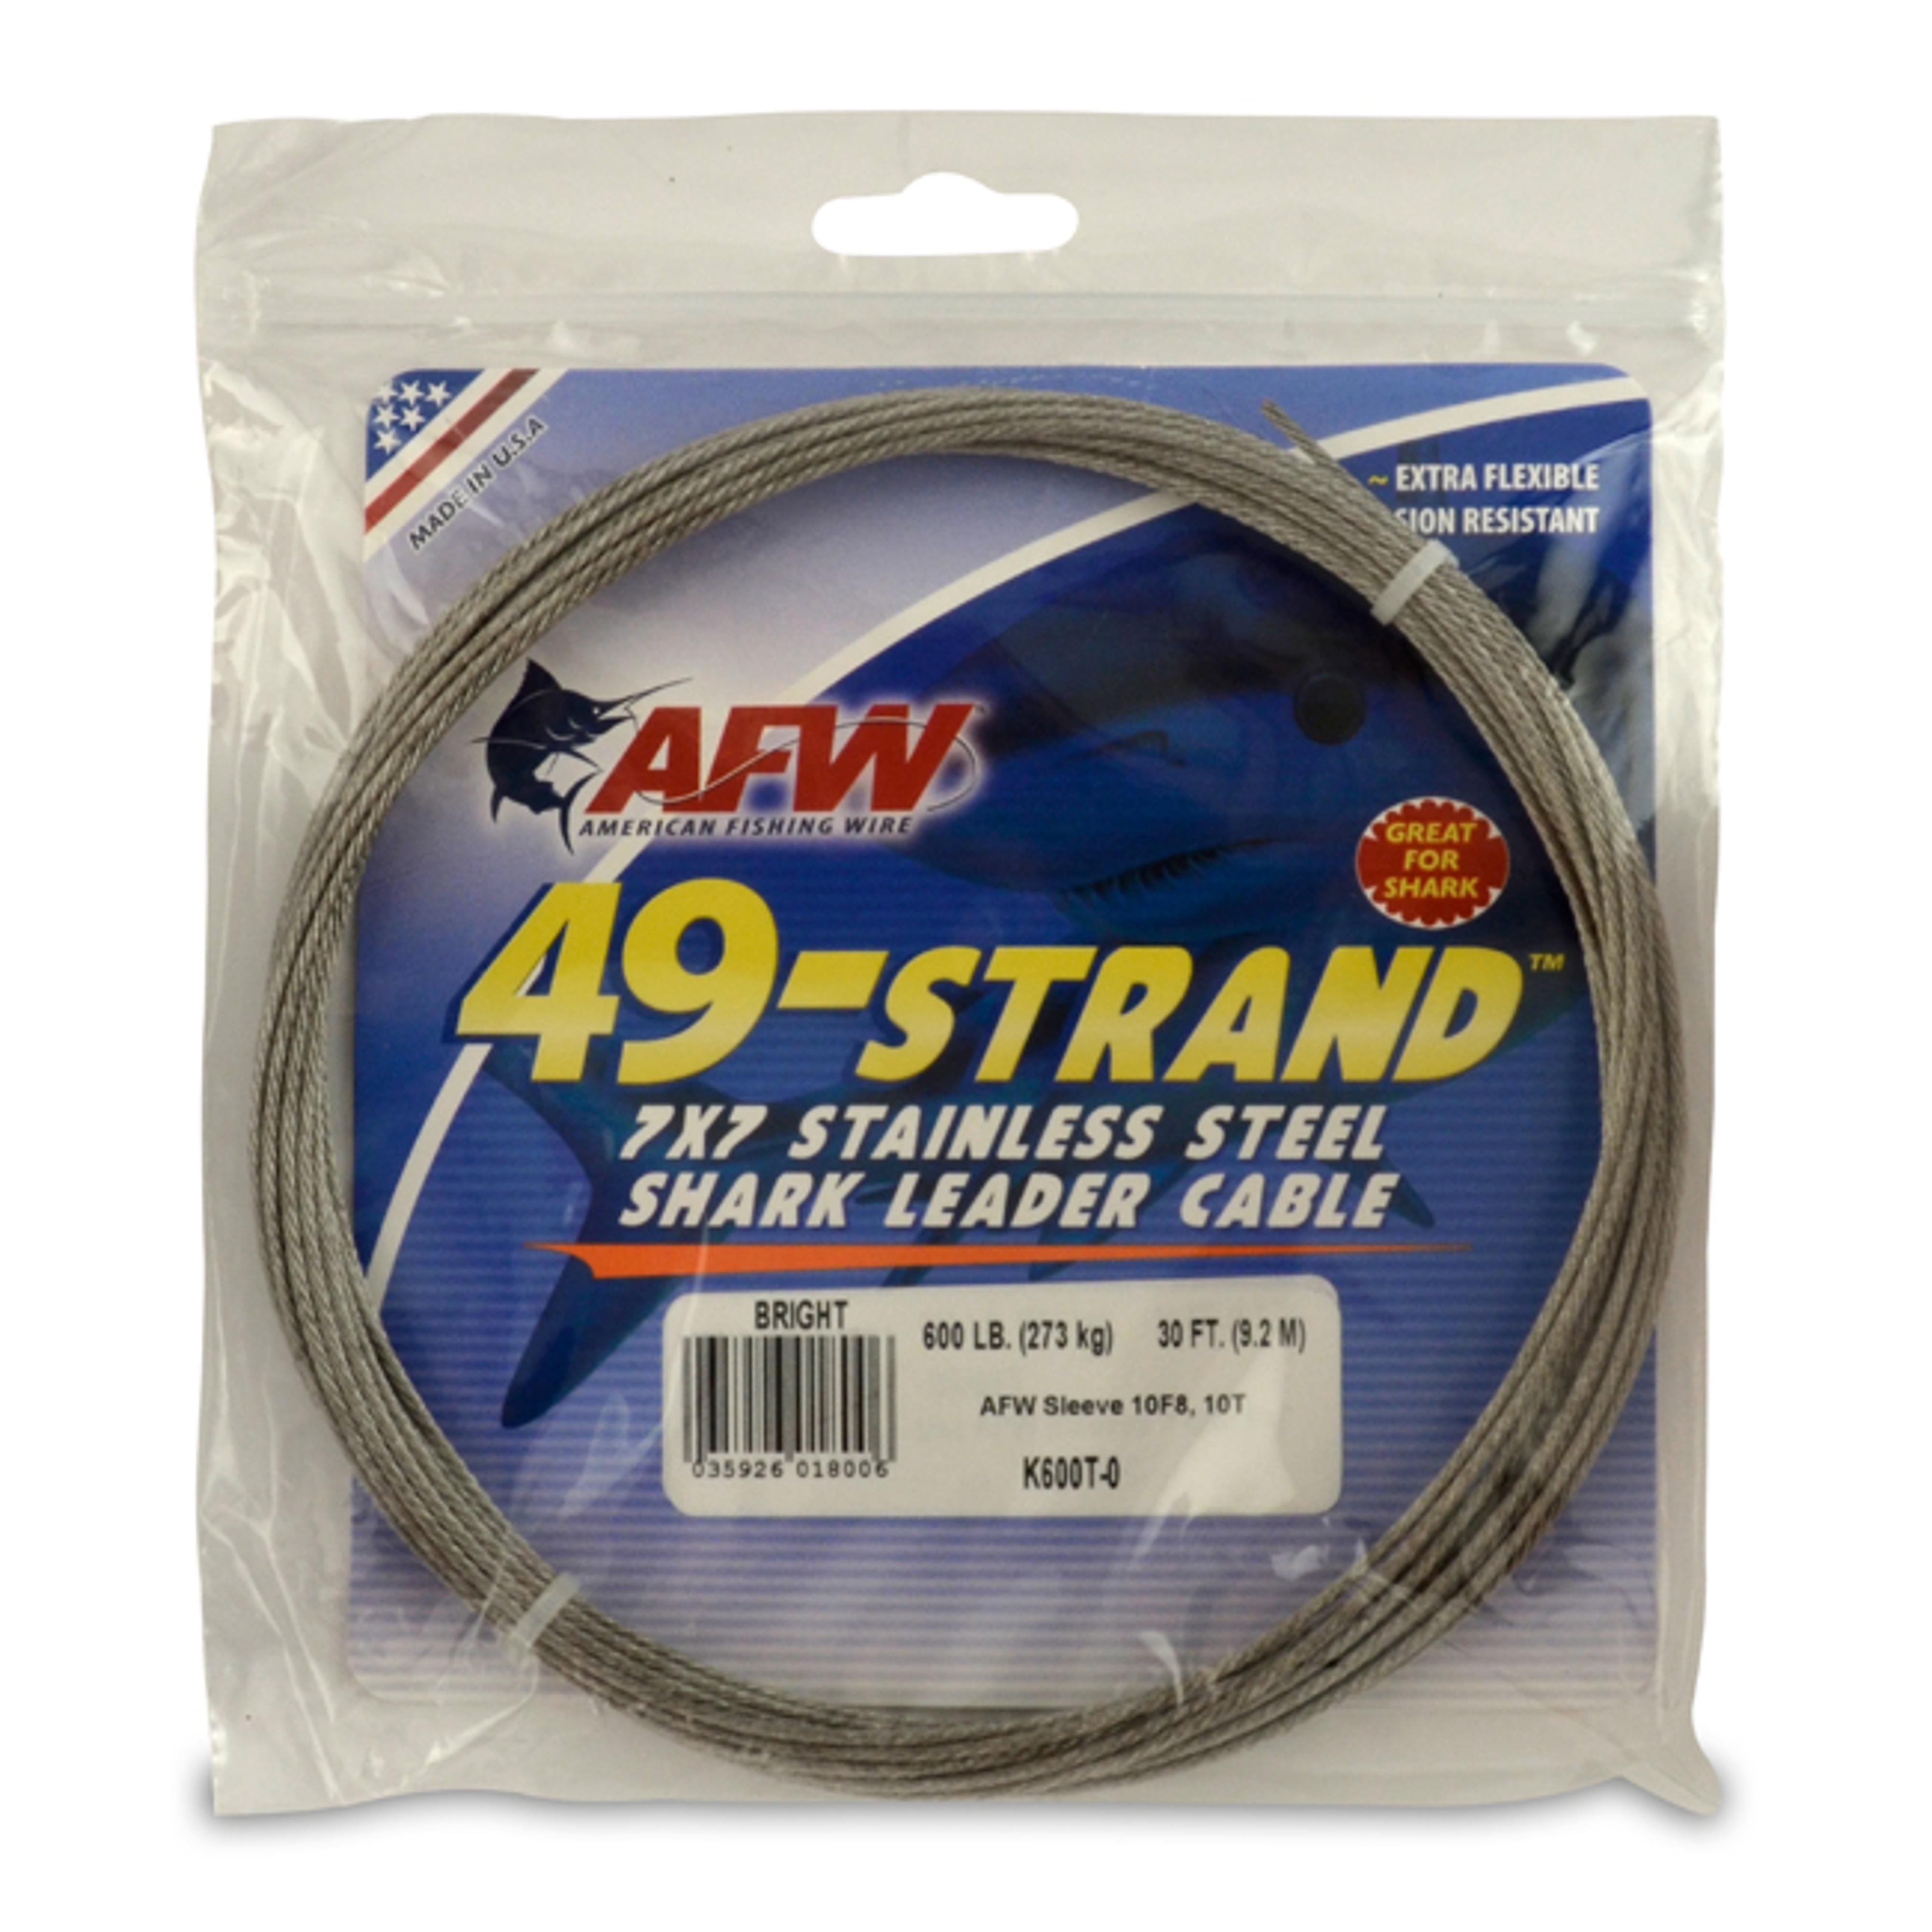 49 Strand 7x7 Stainless Steel Shark Leader Cable 600lb Bright